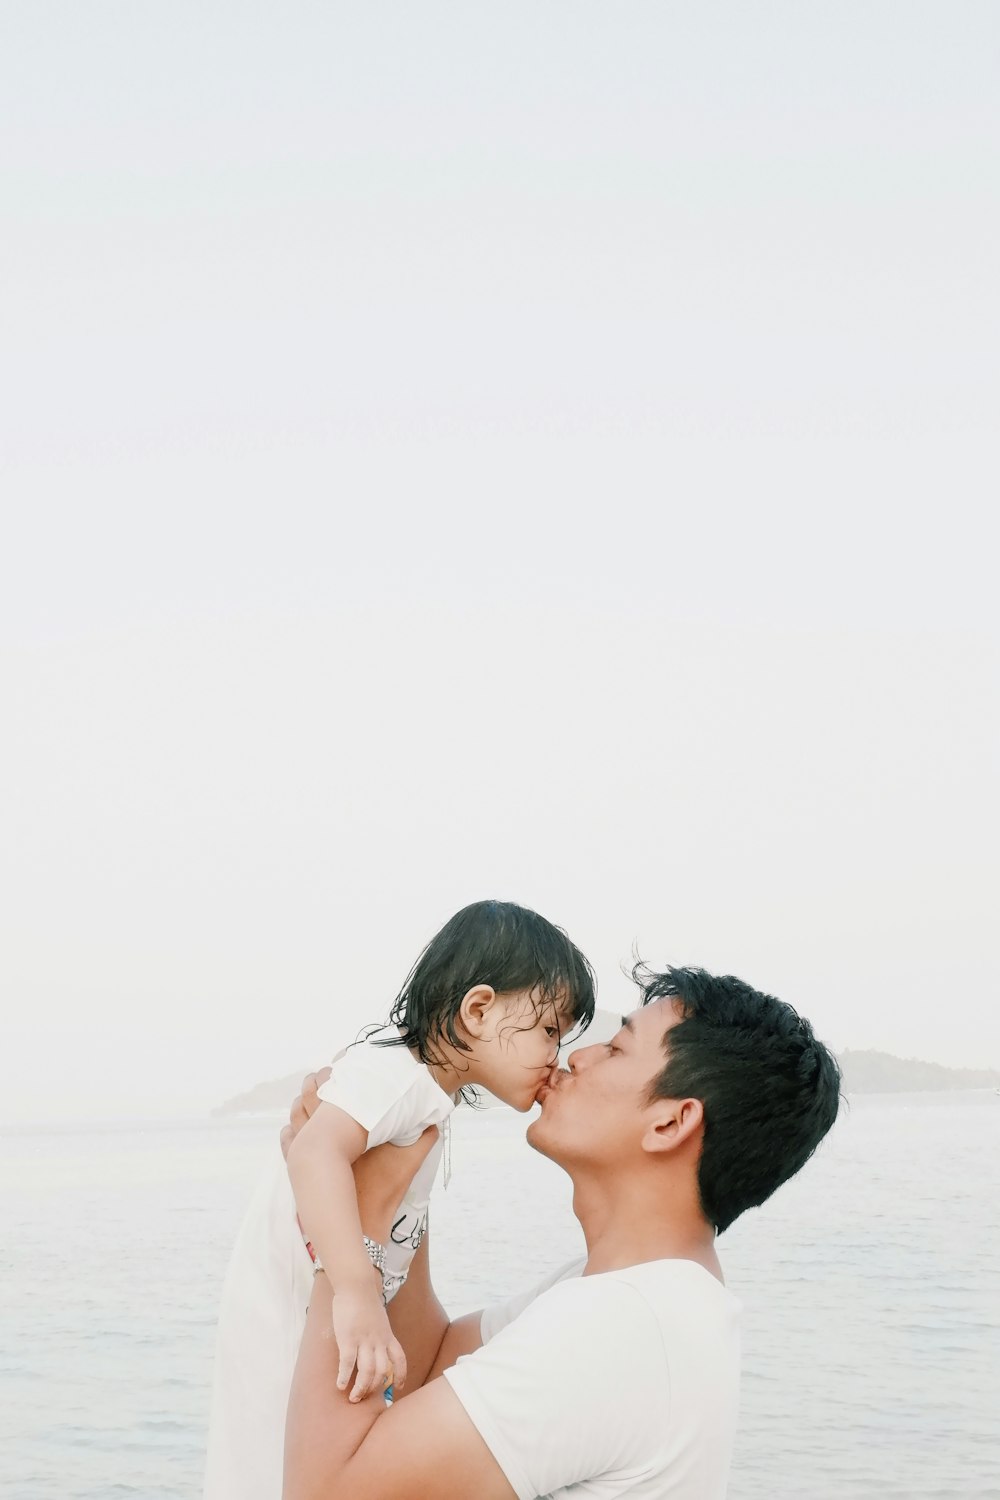 Asian Father Pictures | Download Free Images on Unsplash